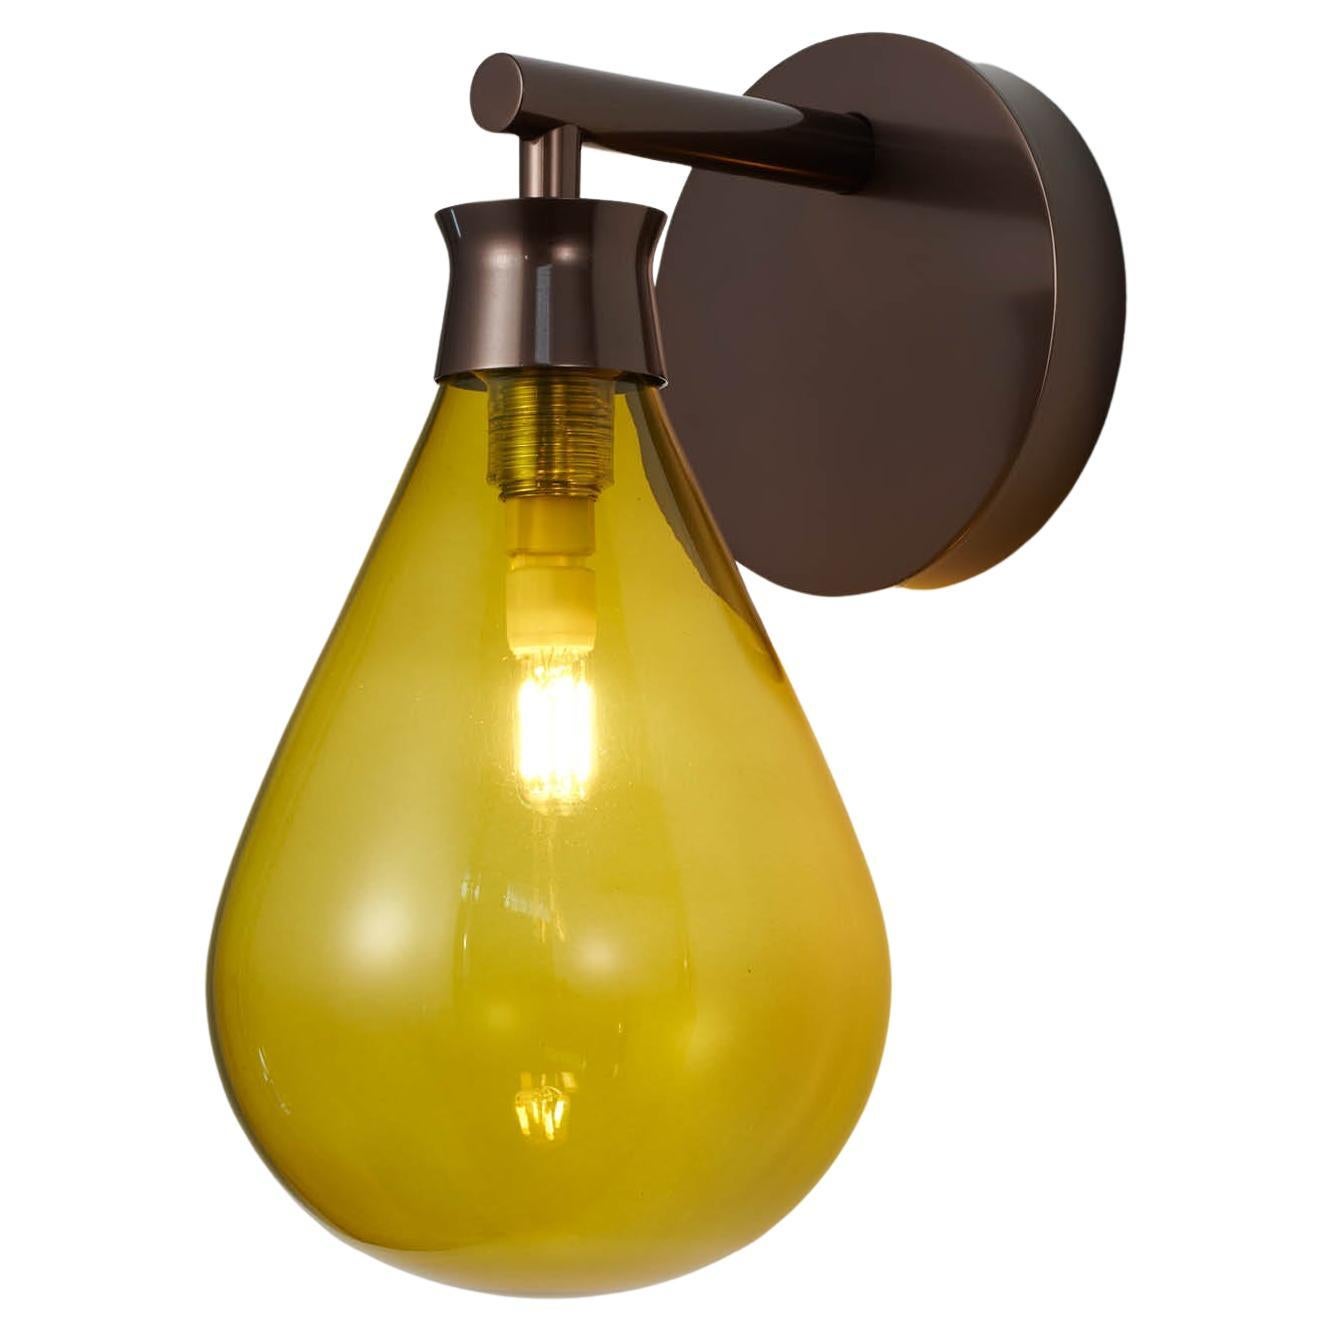 Cintola Wall Light in Satin Bronze with Olive Handblown Glass Globe